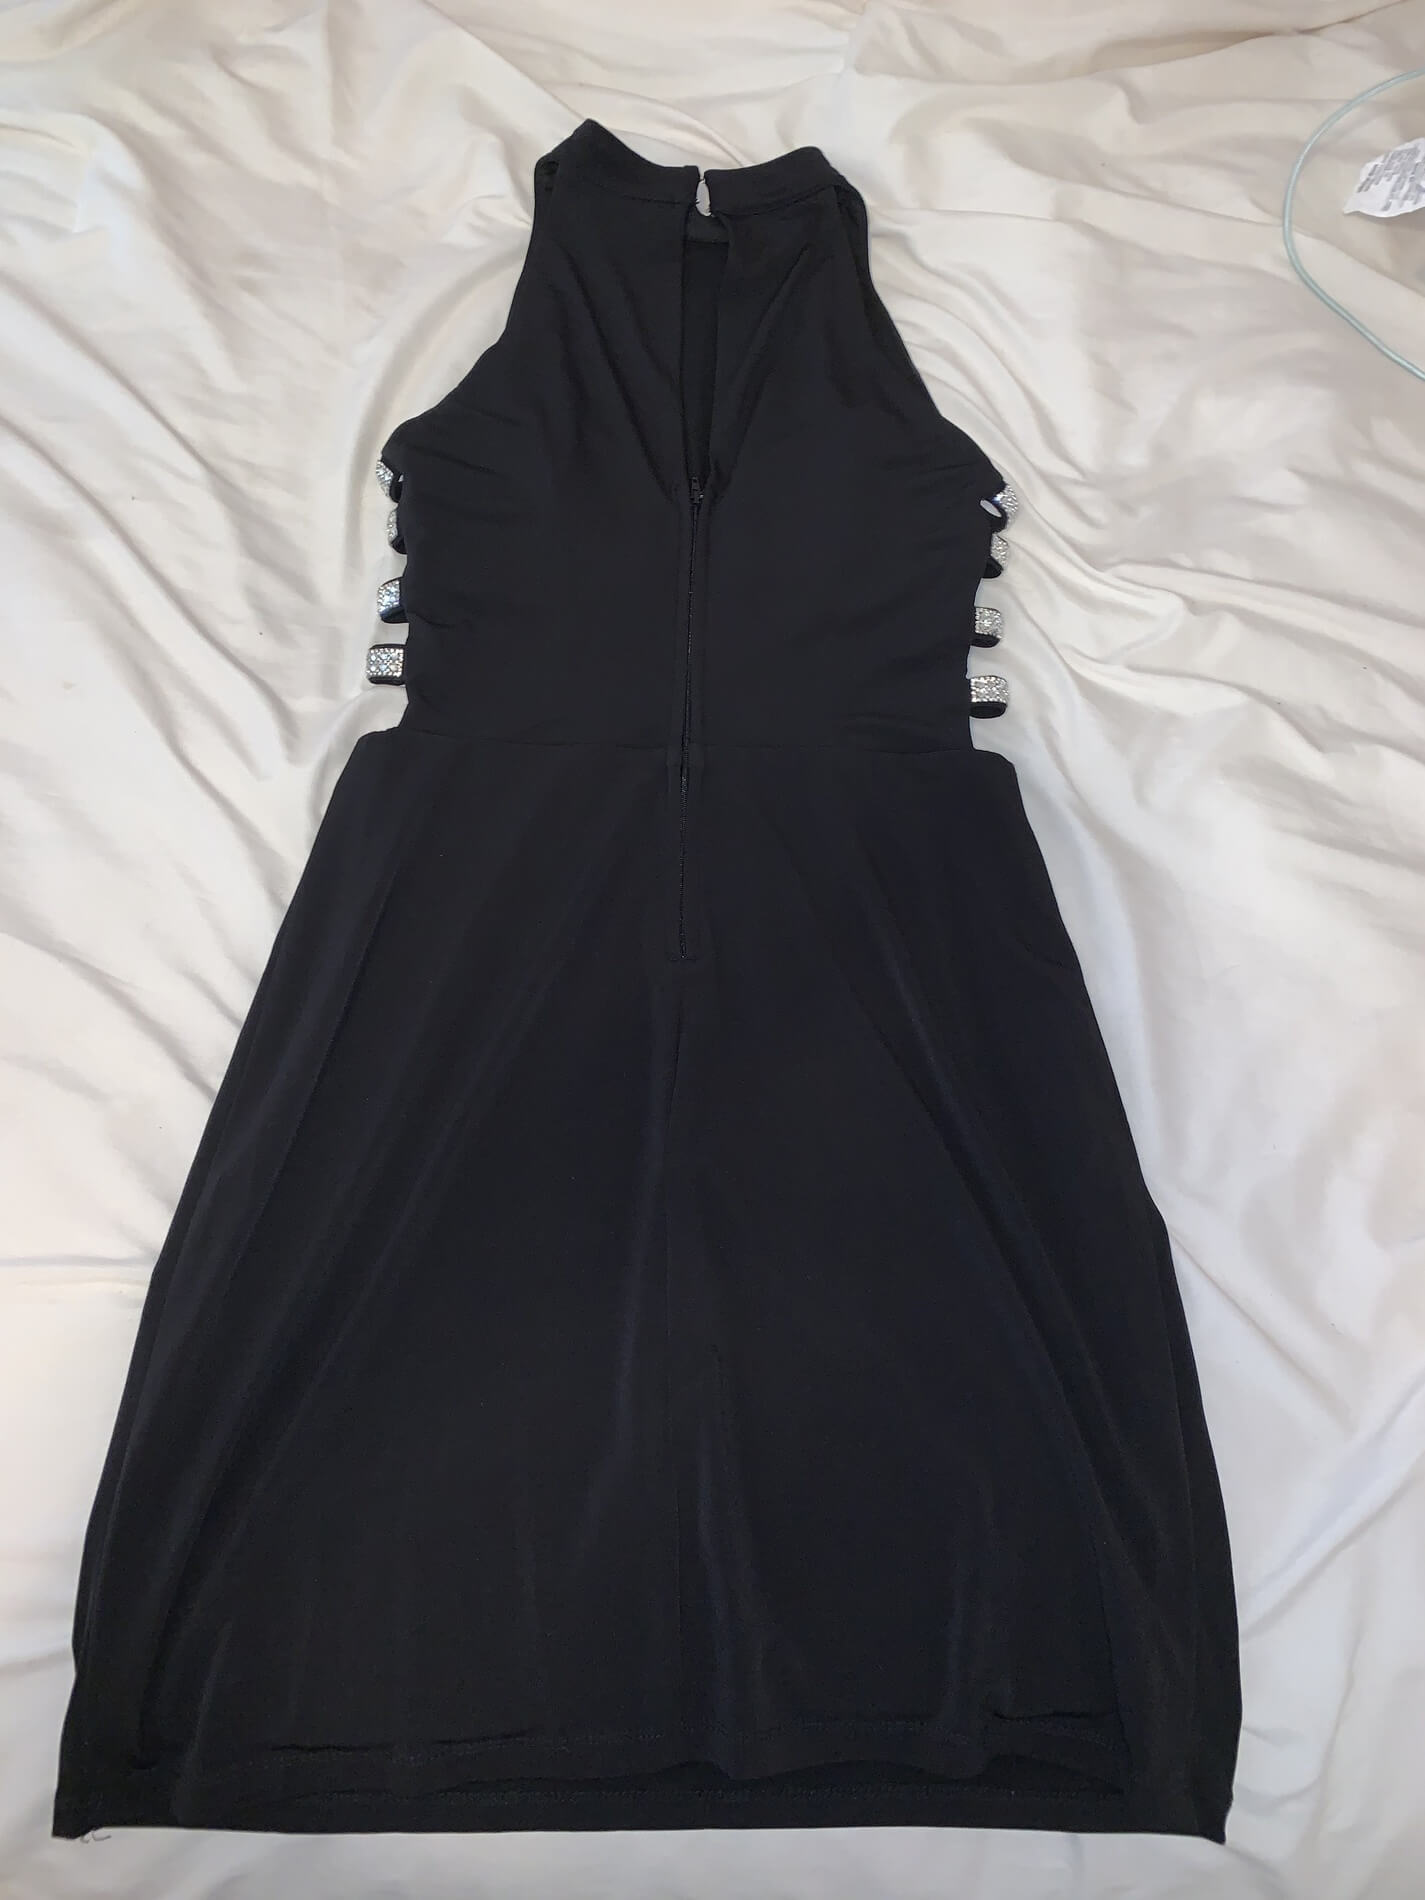 Xtraordinary Size 8 Halter Black Cocktail Dress on Queenly